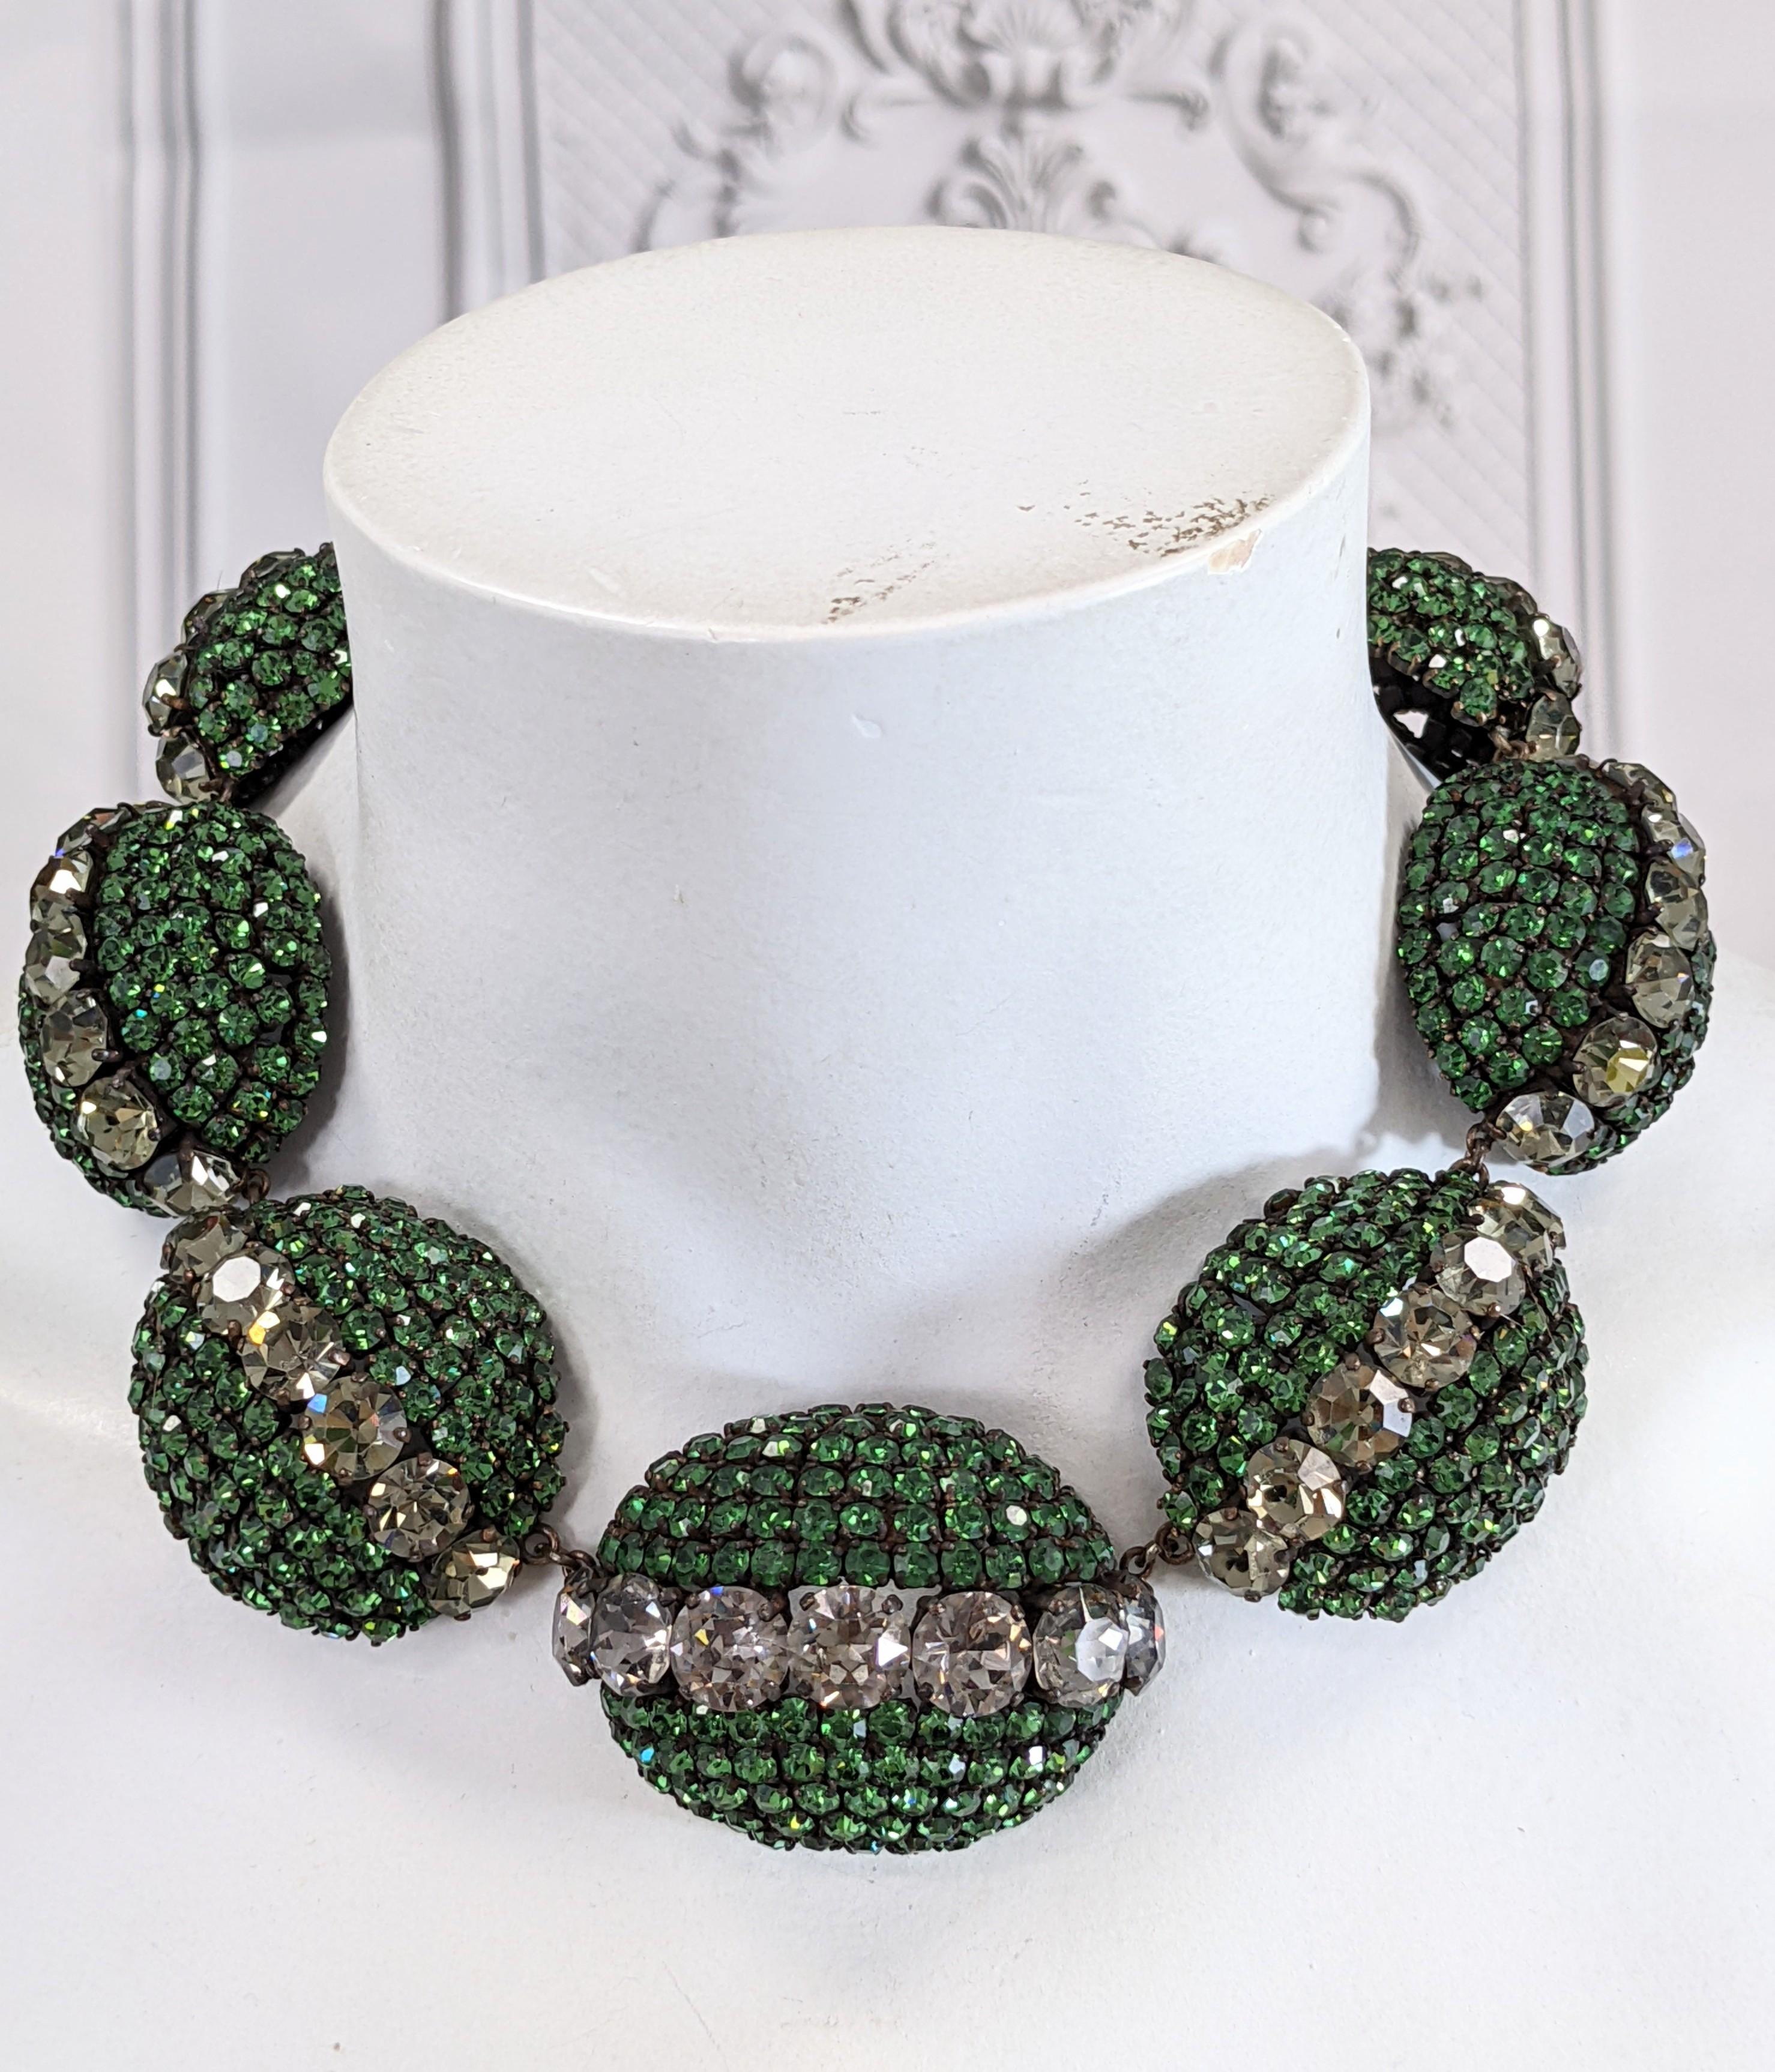 Balenciaga Haute Couture Necklace, Provenance Bunny Mellon In Excellent Condition For Sale In New York, NY